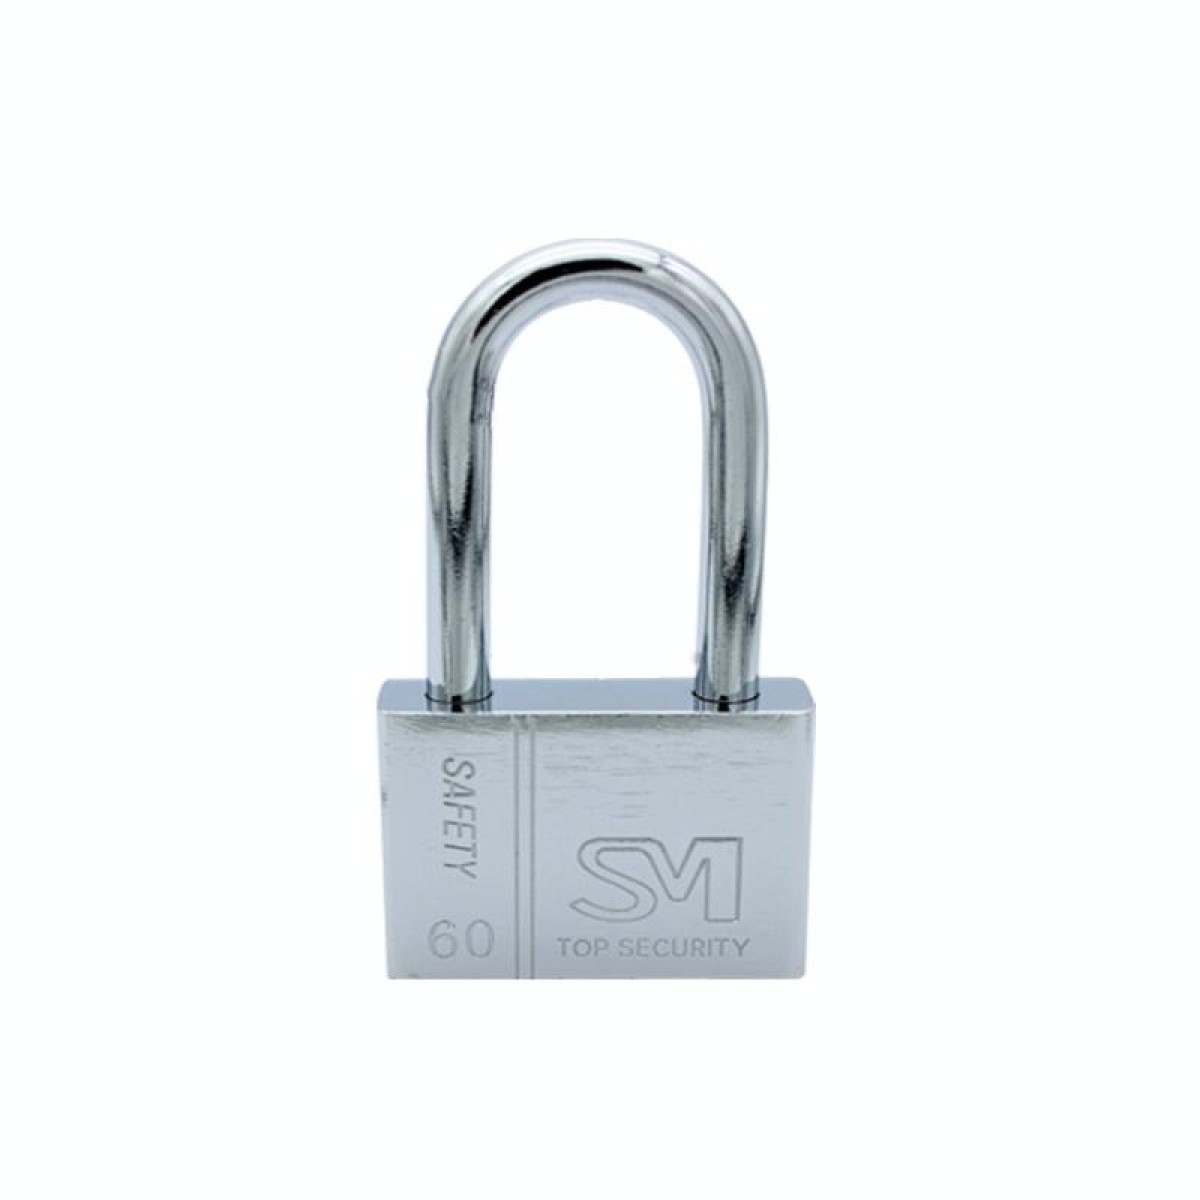 Square Blade Imitation Stainless Steel Padlock, Specification: Long 60mm Not Open